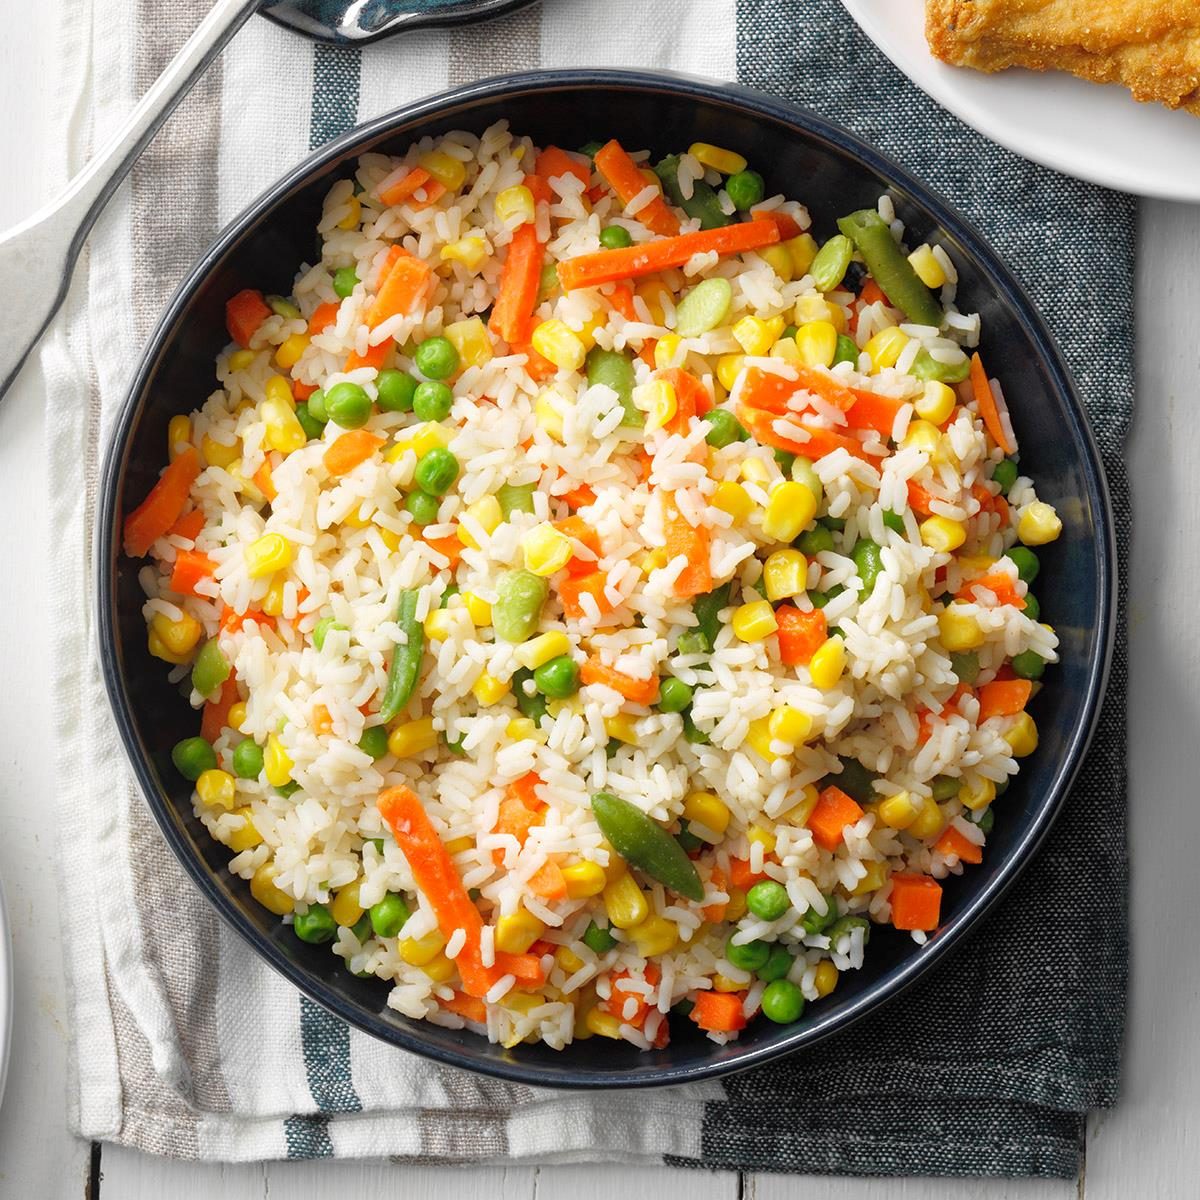 Mixed Veggies and Rice Recipe: How to Make It